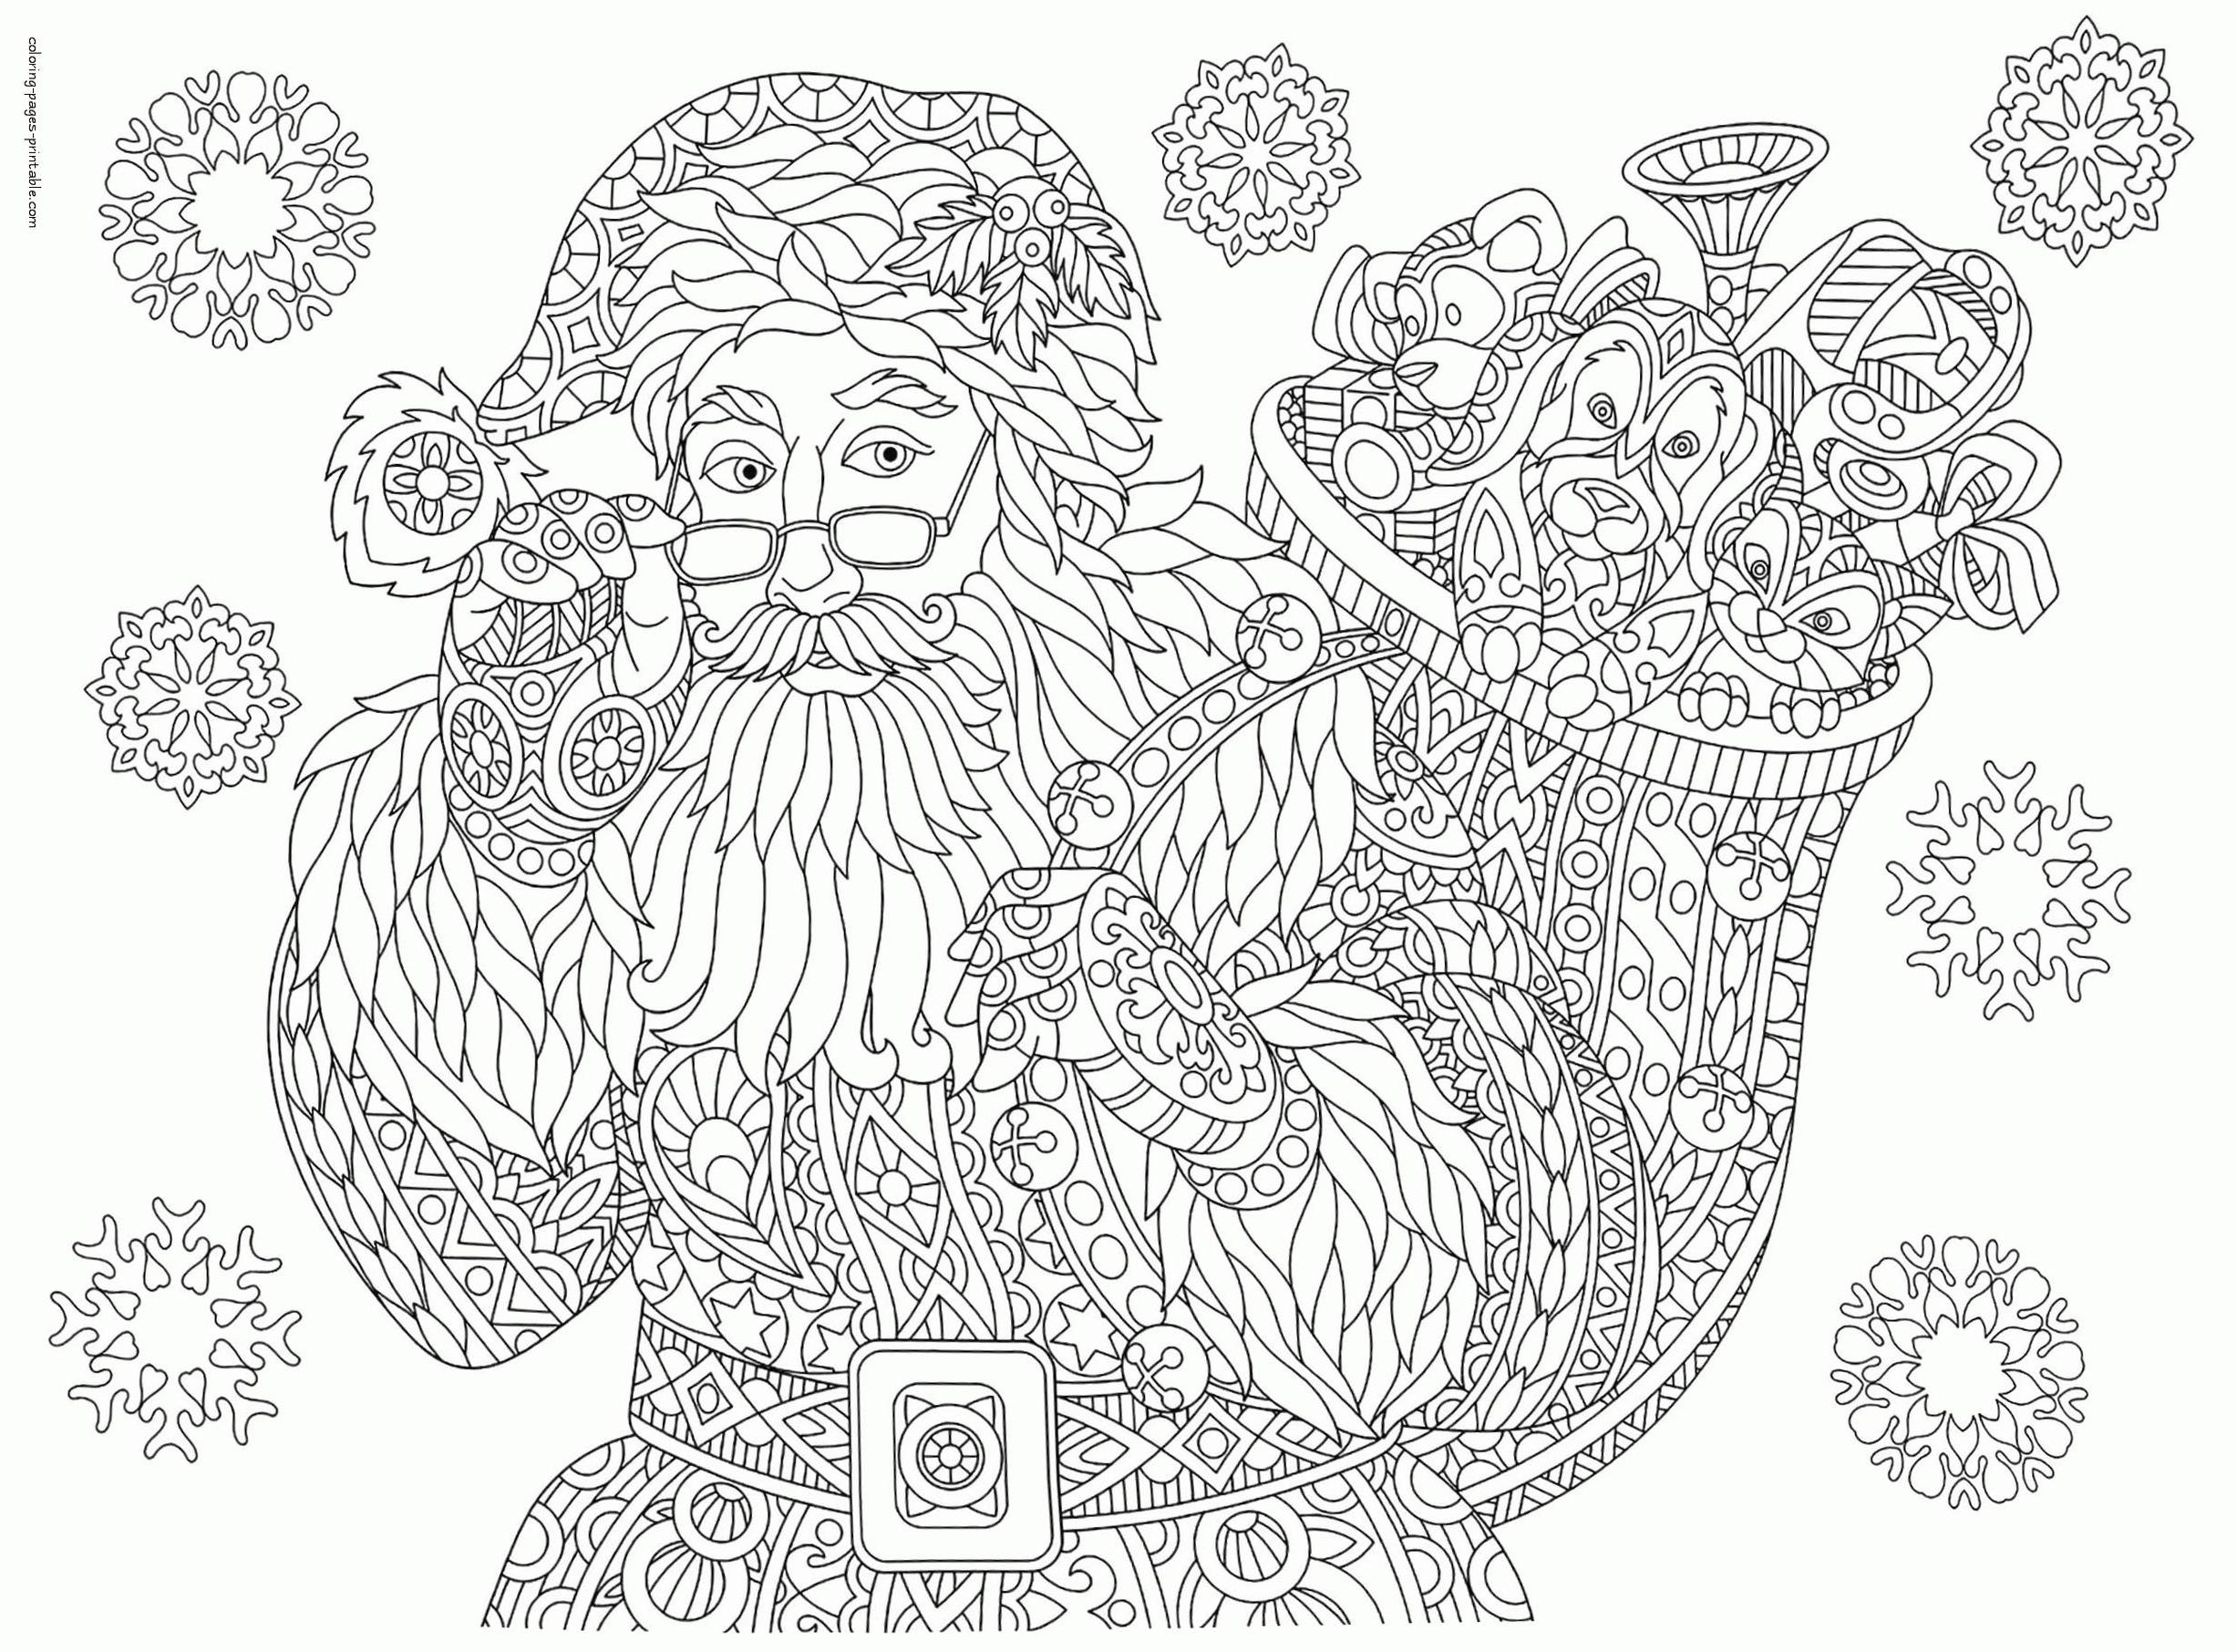 get-this-adult-christmas-coloring-pages-to-print-santa-clause-jkl2